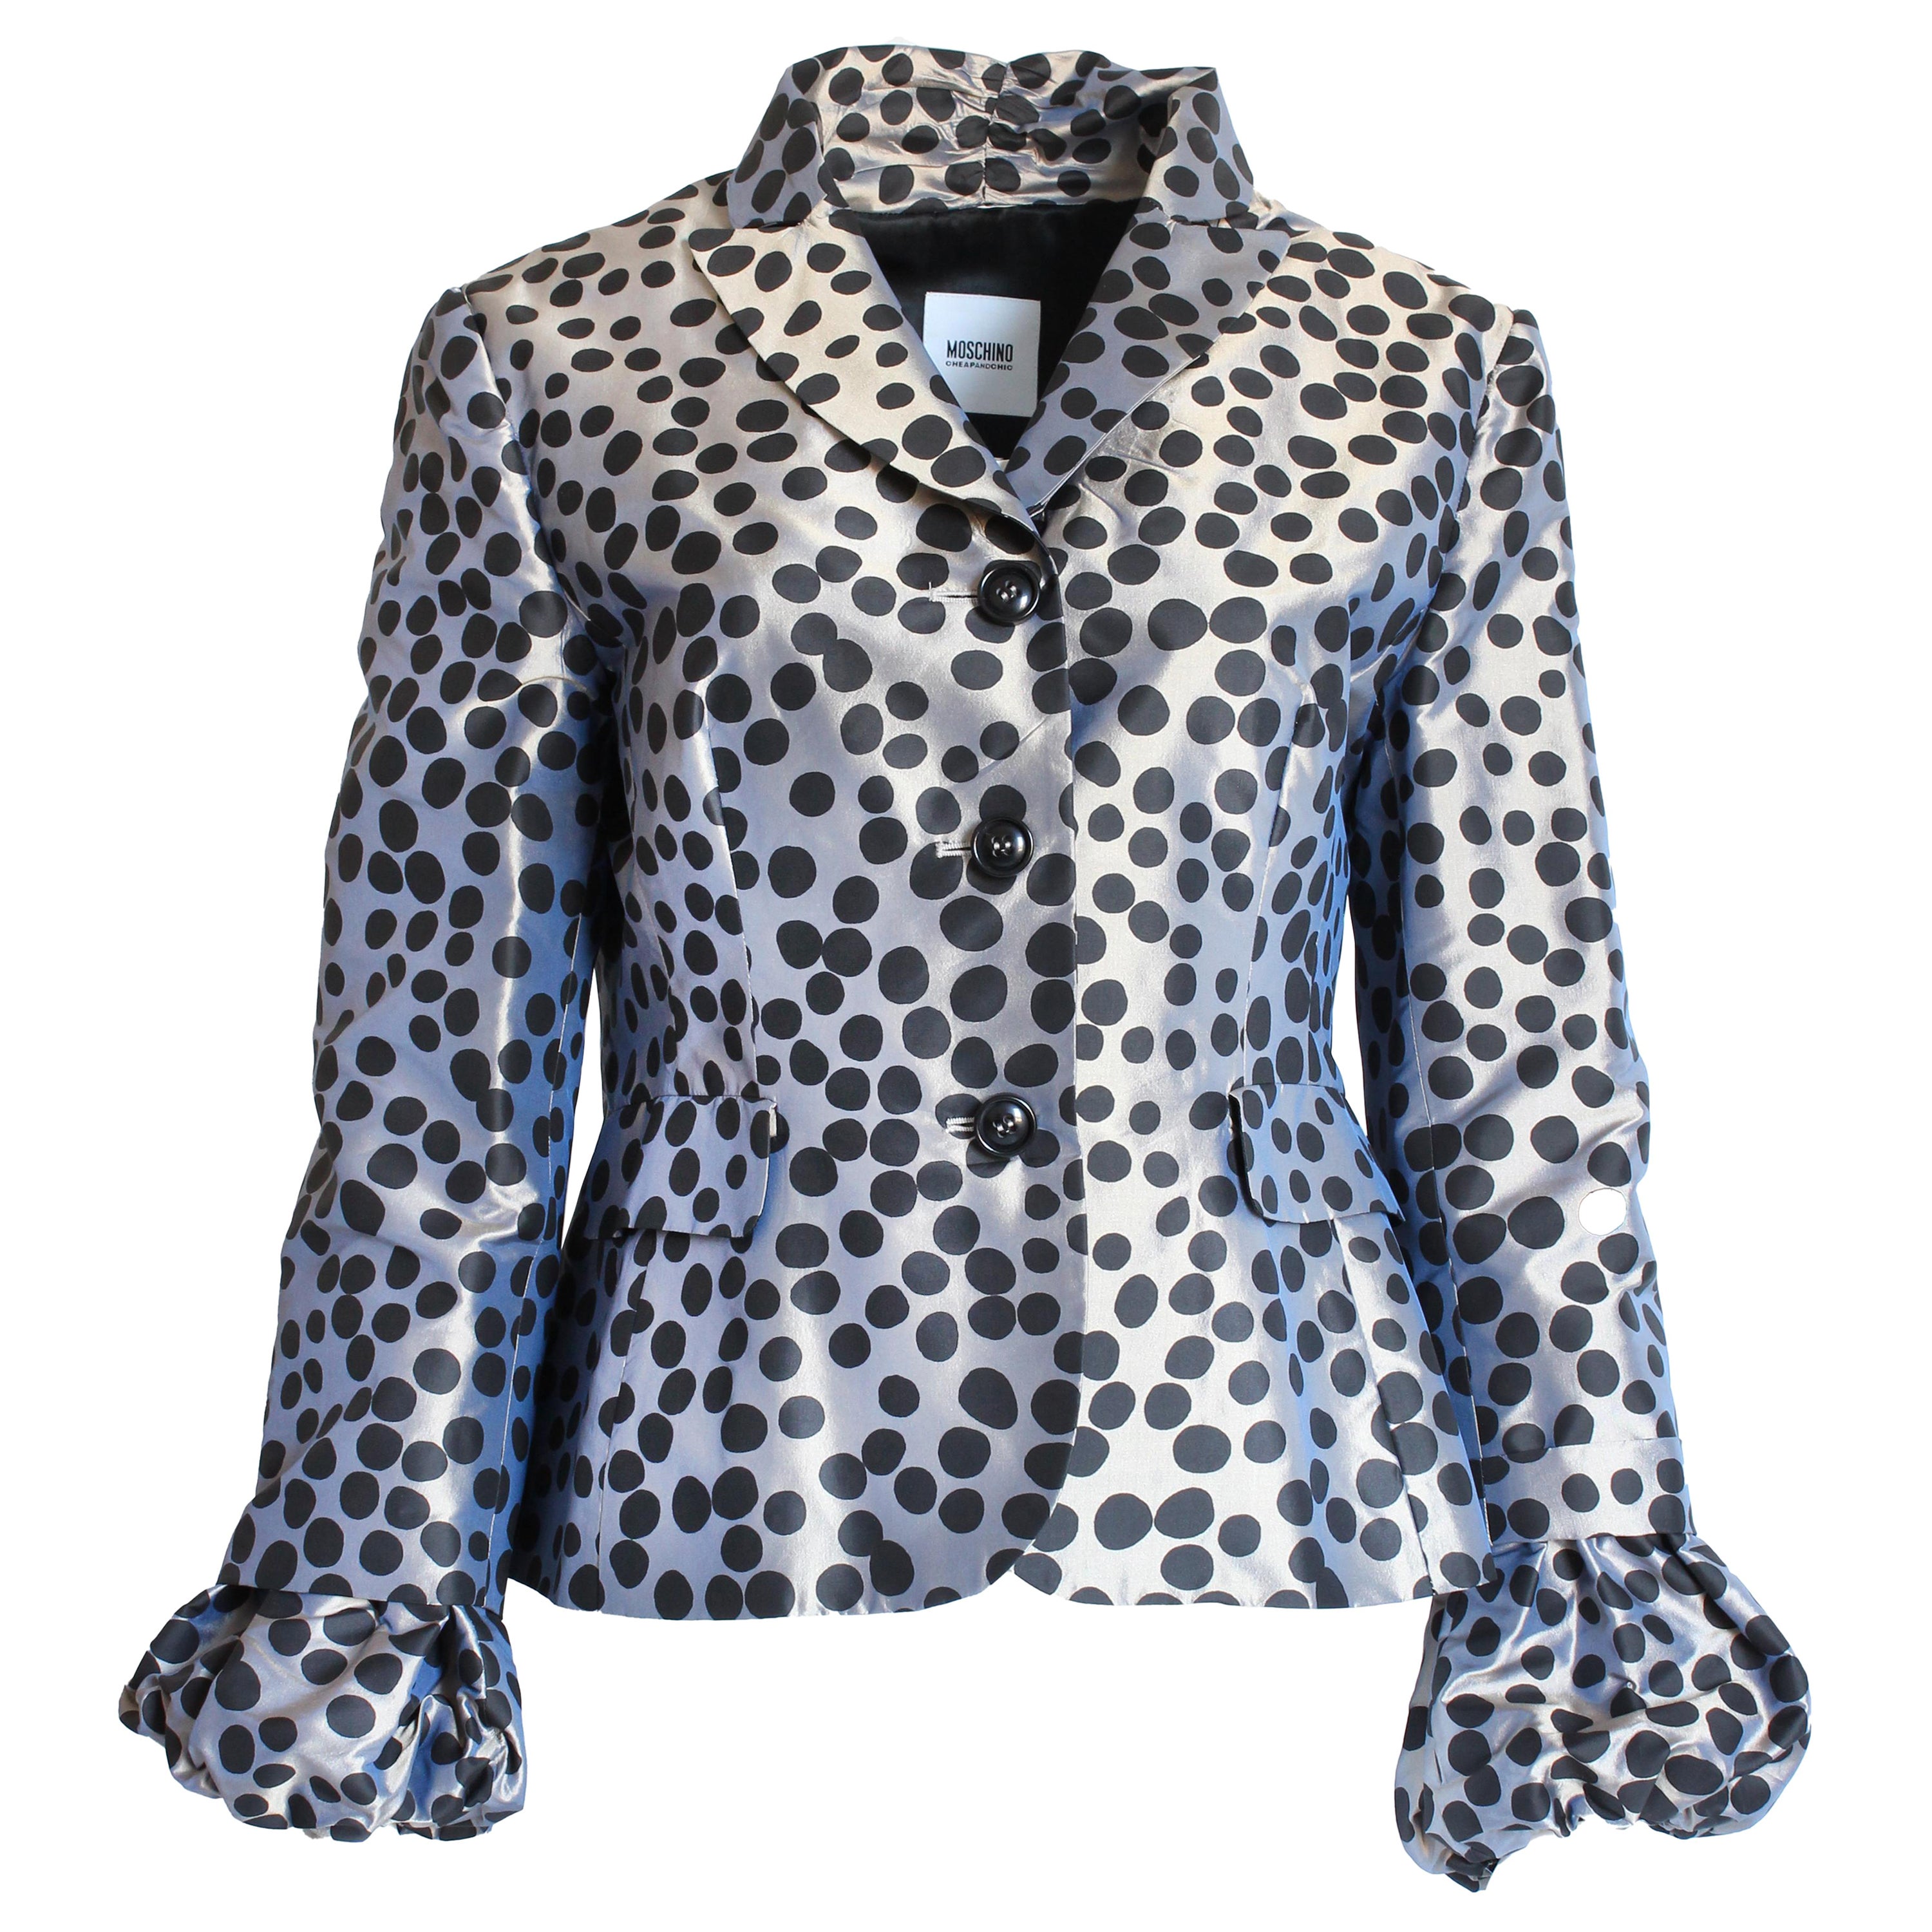 Moschino Jacket Gunmetal Silk with Polka Dots Puff Sleeves Cheap and Chic US 12 For Sale